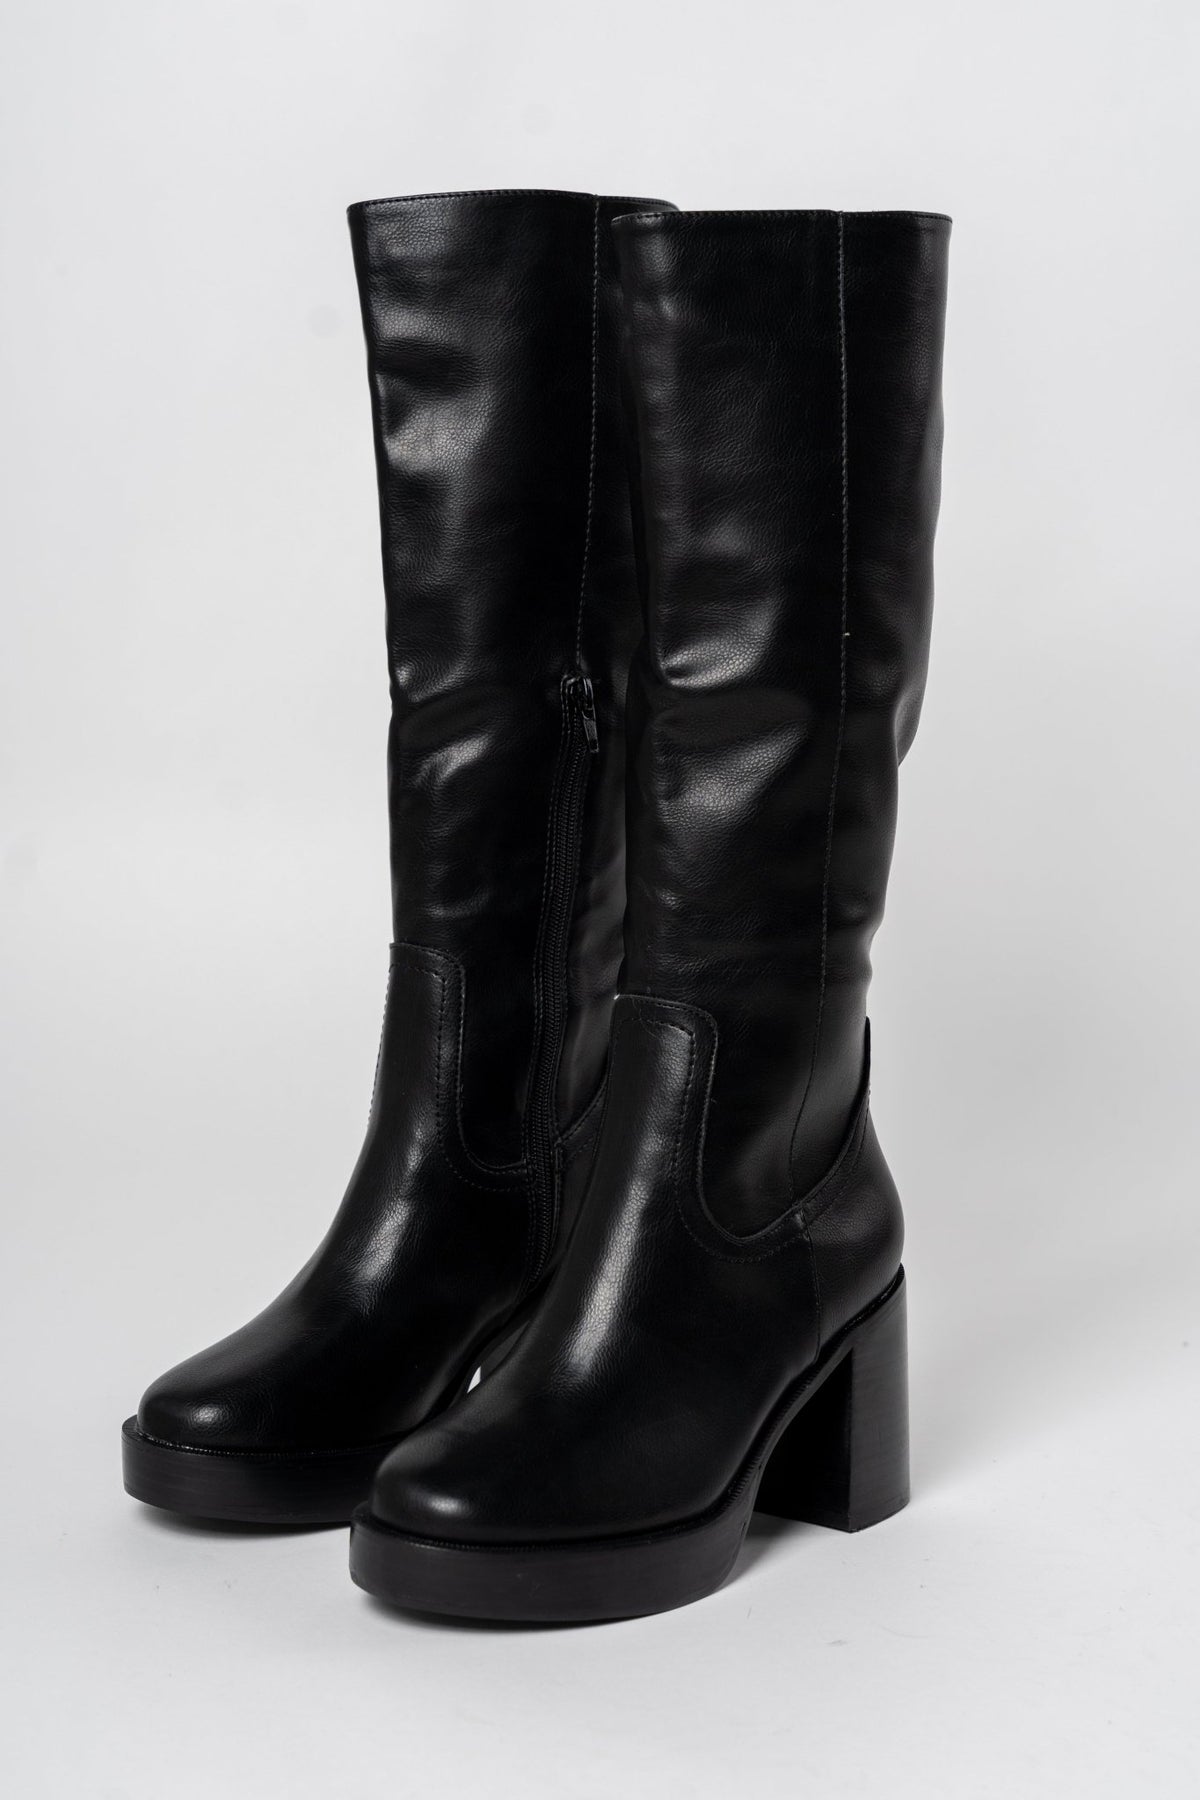 Juniper platform knee high boot black - Cute shoes - Trendy Shoes at Lush Fashion Lounge Boutique in Oklahoma City